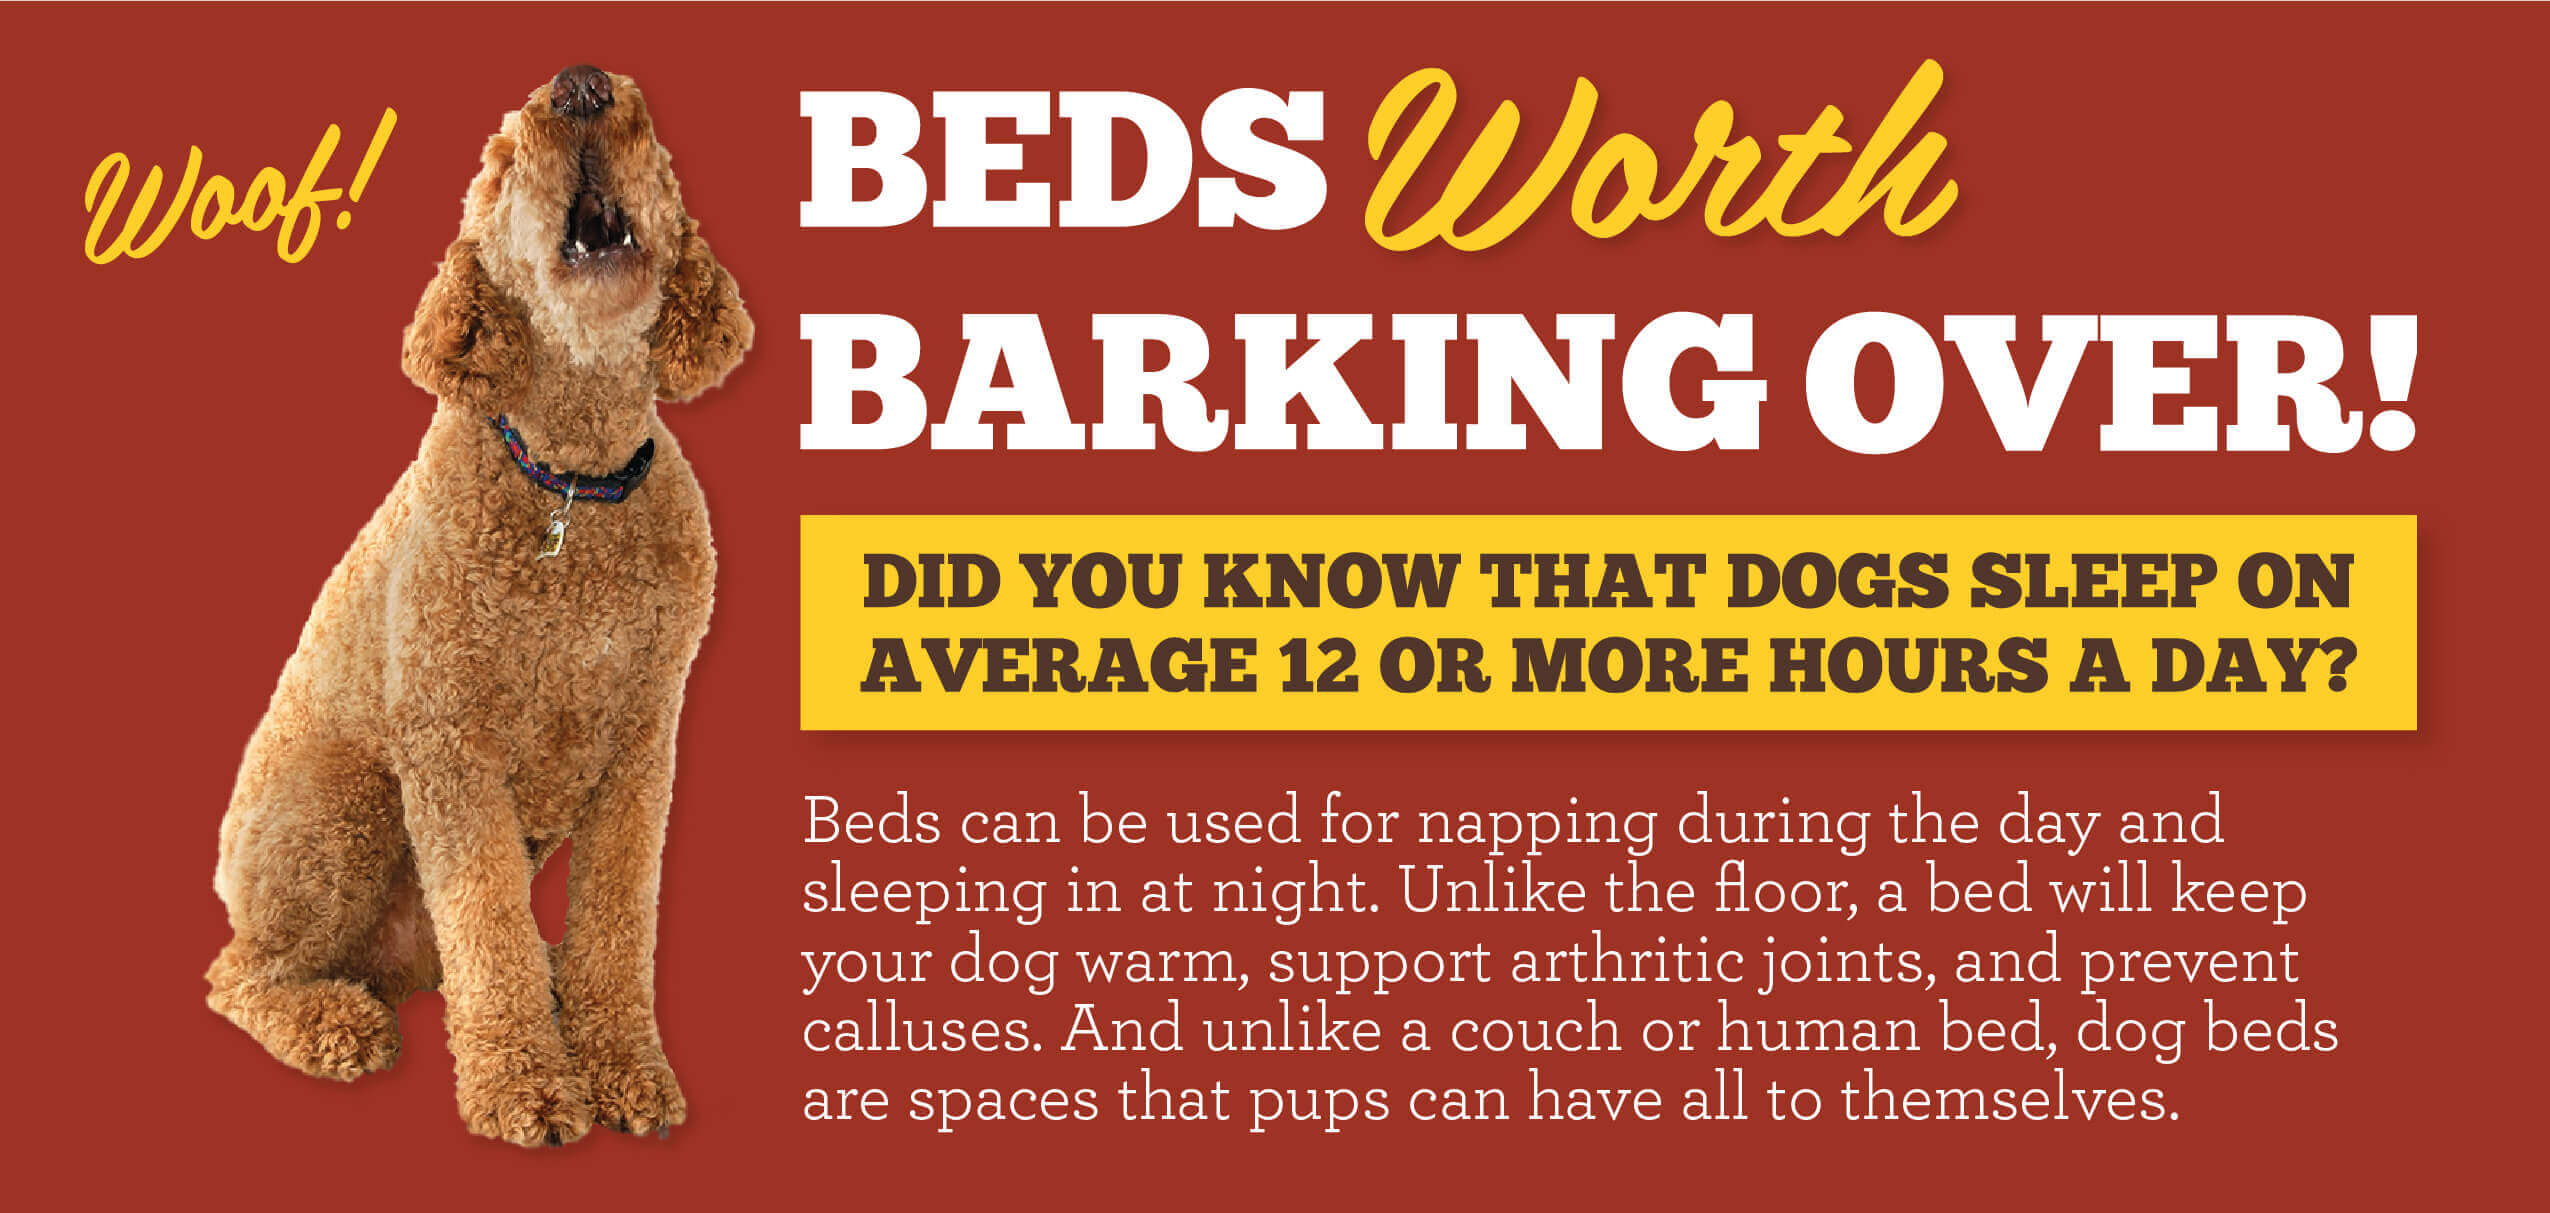 Beds worth Barking Over!